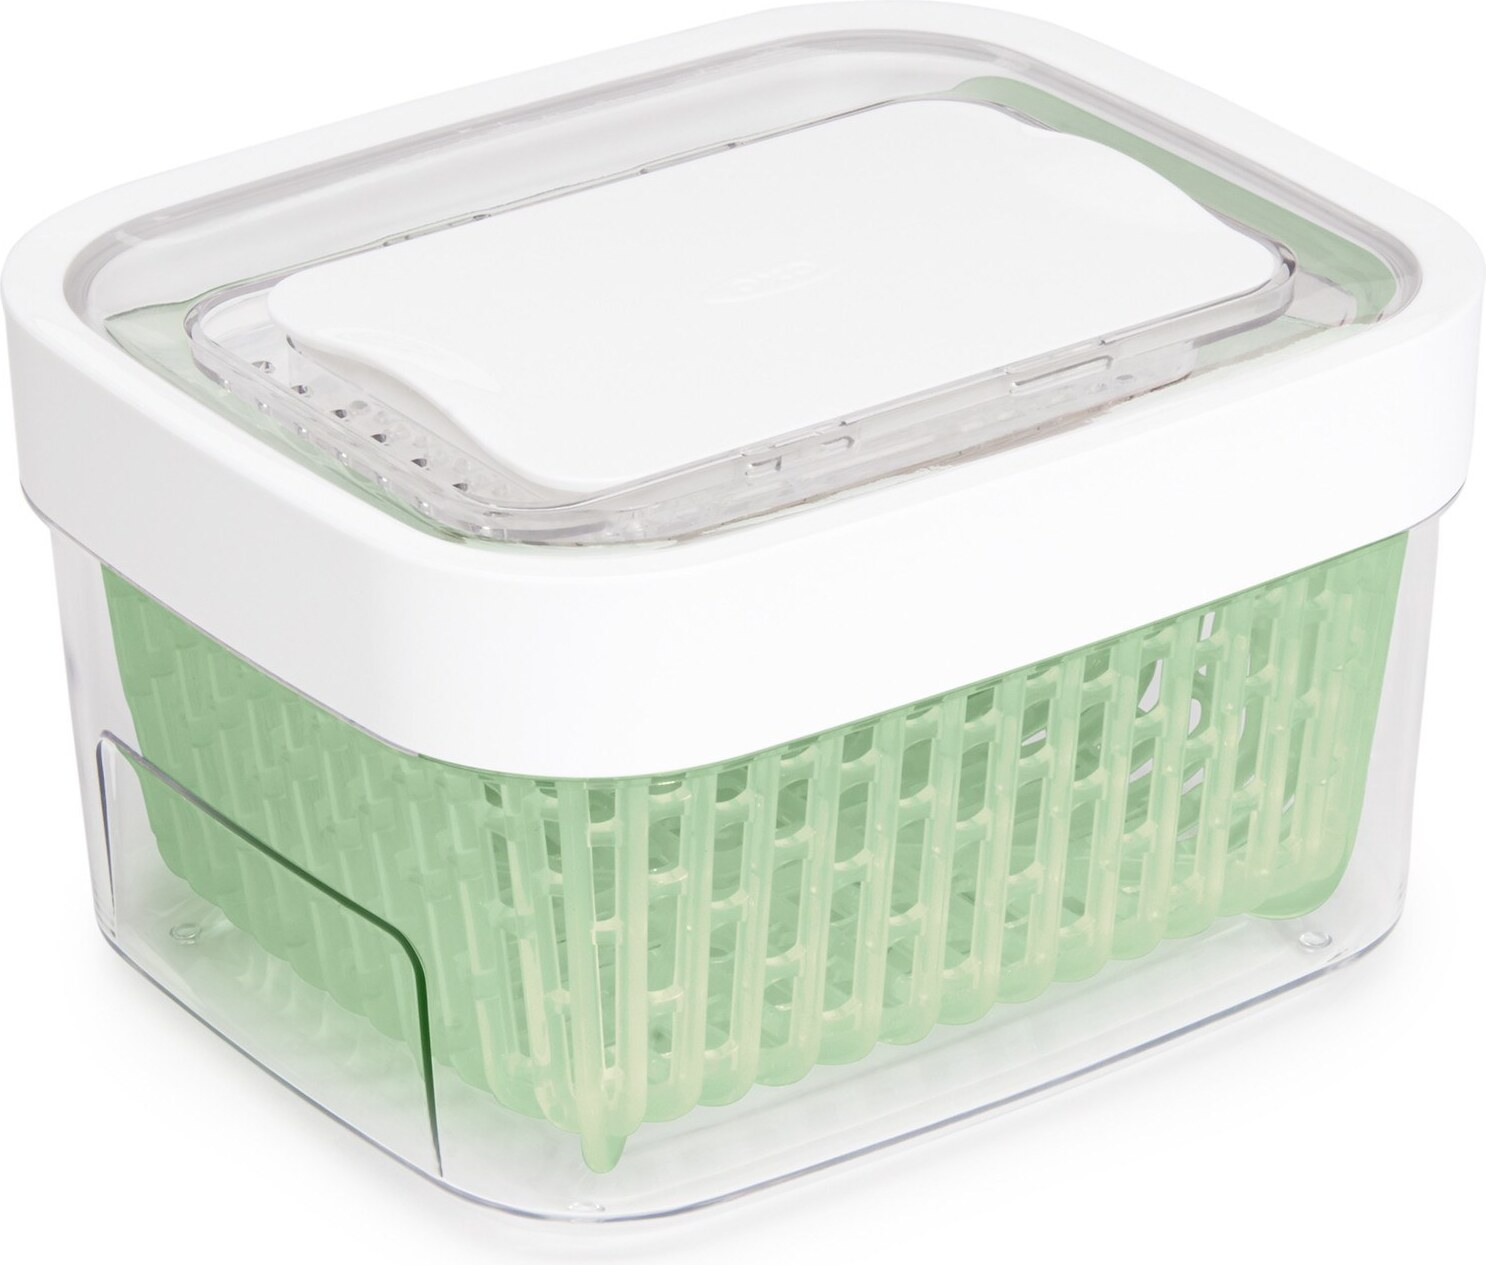 https://3fa-media.com/oxo/oxo-greensaver-fruit-and-vegetable-container-1-5-l-with-carbon-filter__11139900V2MLNYK-b-s2500x2500.jpg